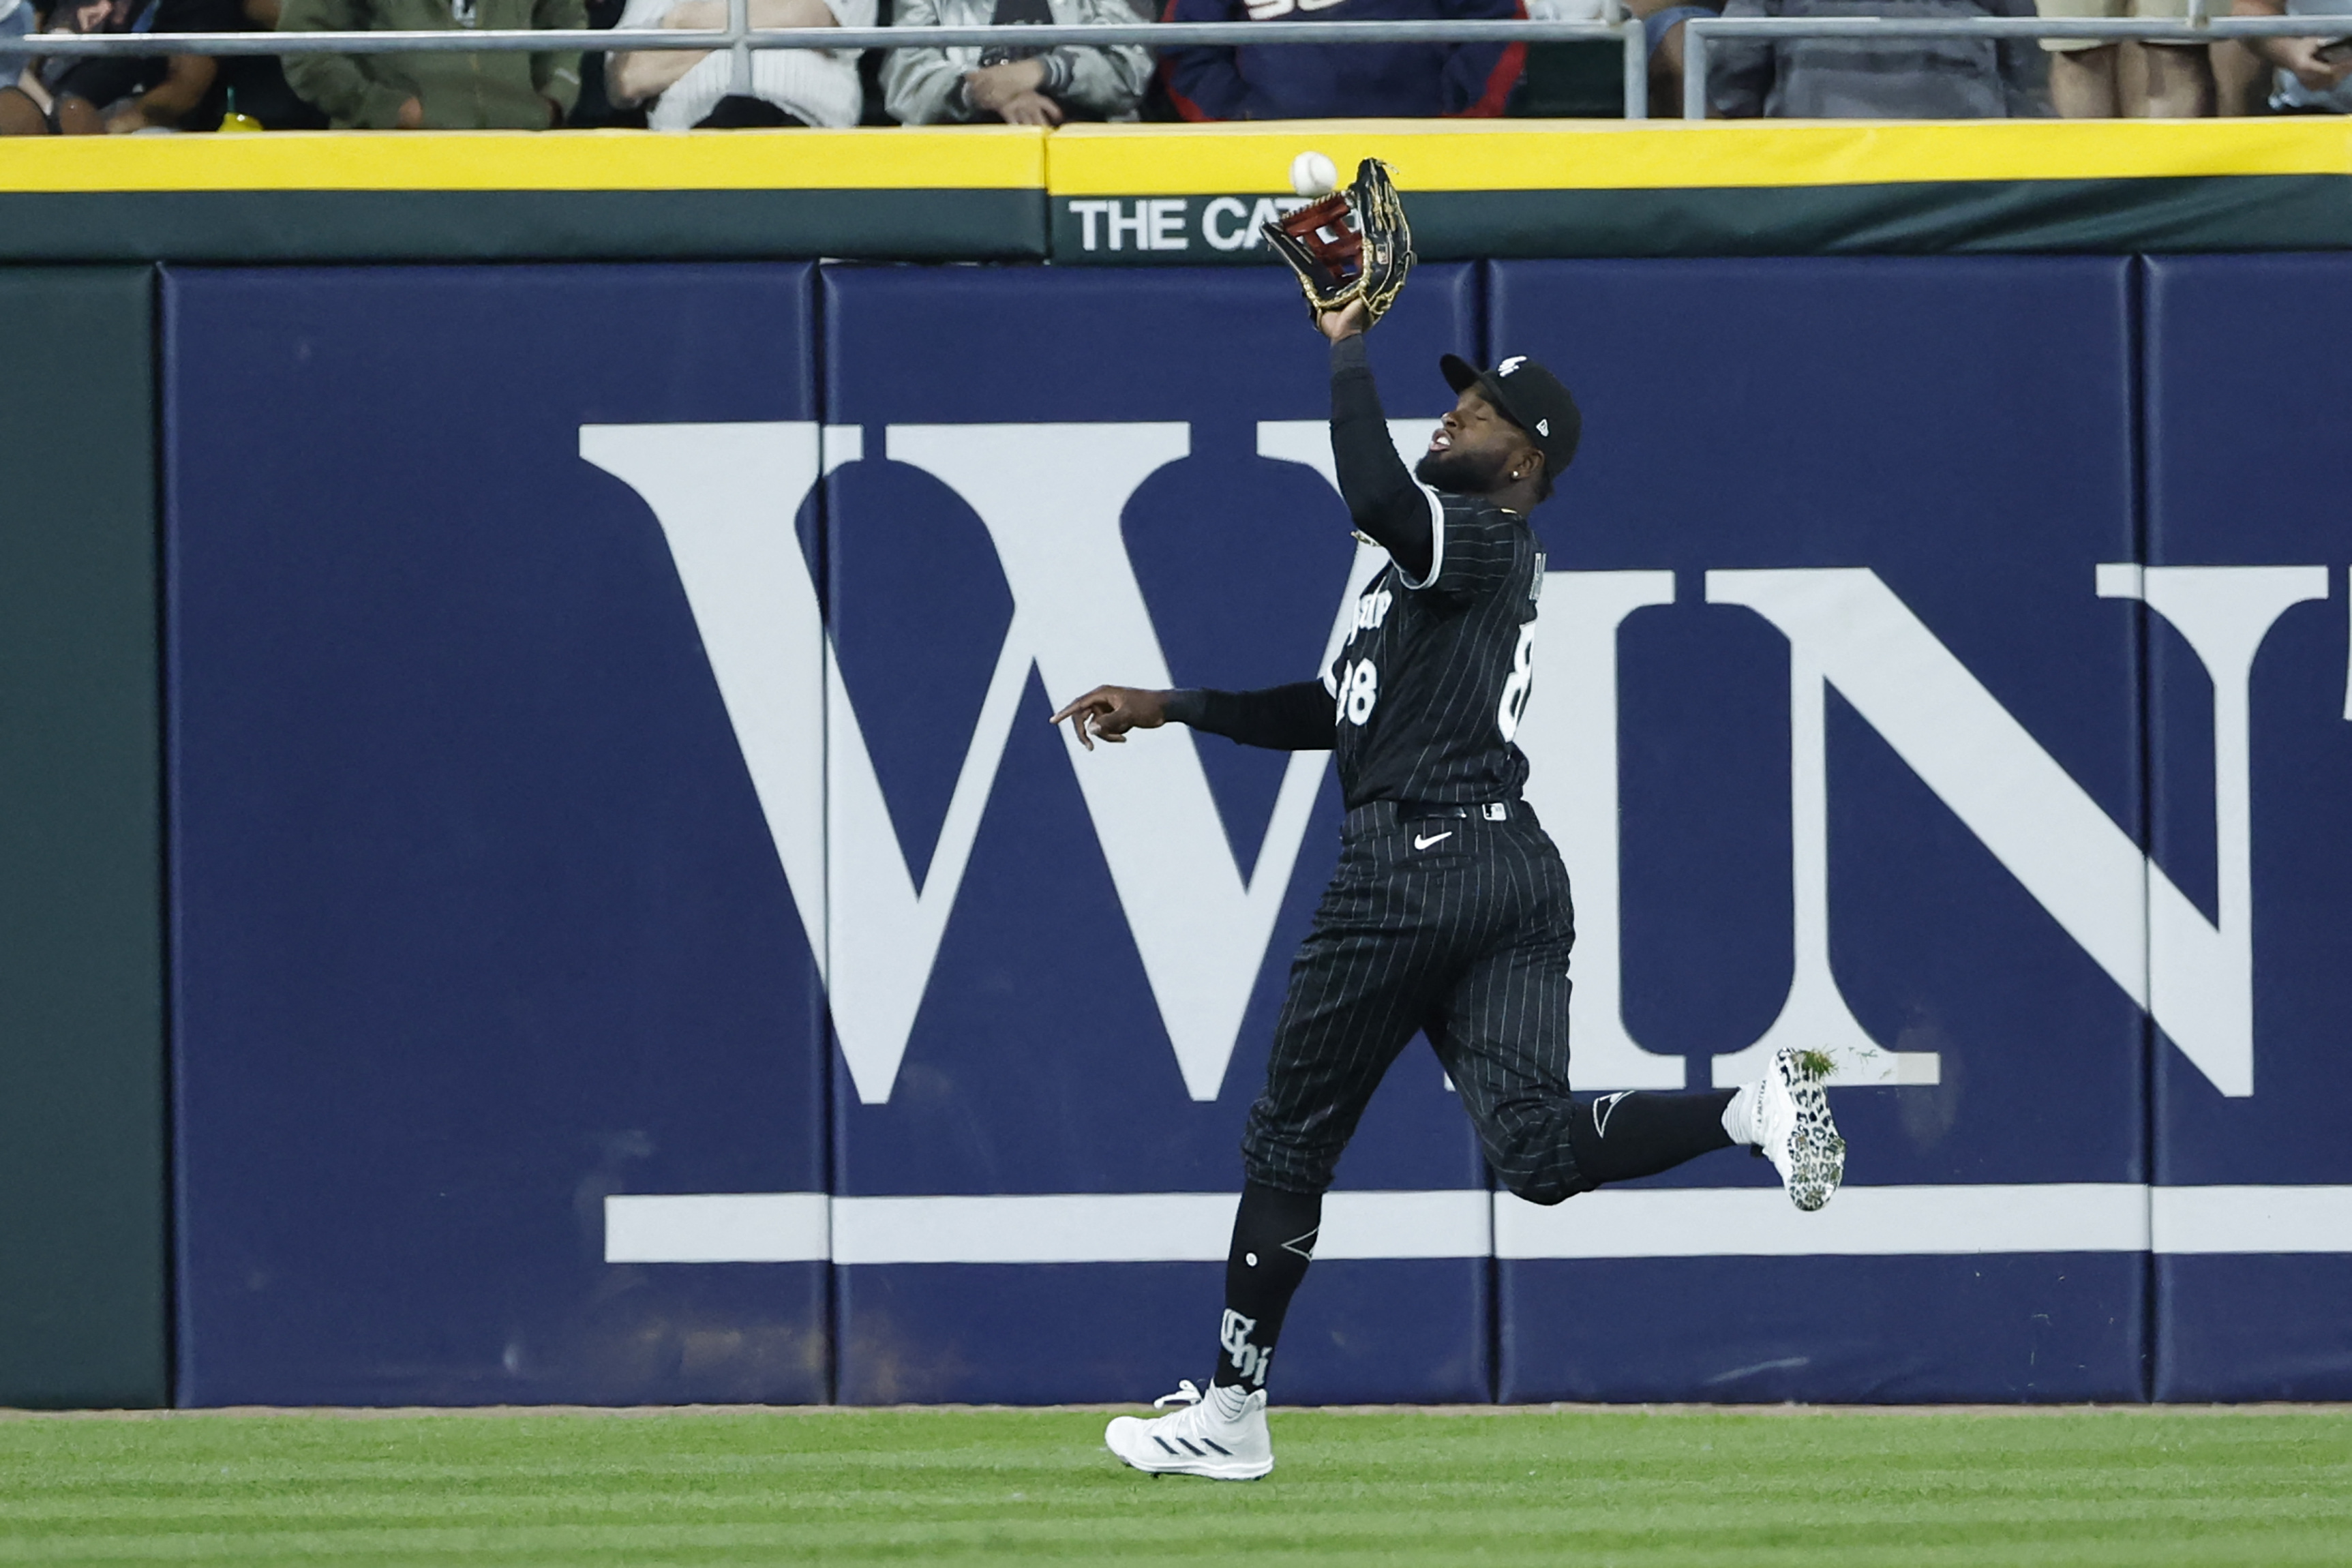 Luis Robert Jr.'s walk-off single gives Chicago White Sox their 6th win in  last 7 games to stay 3½ games out of 1st in AL Central